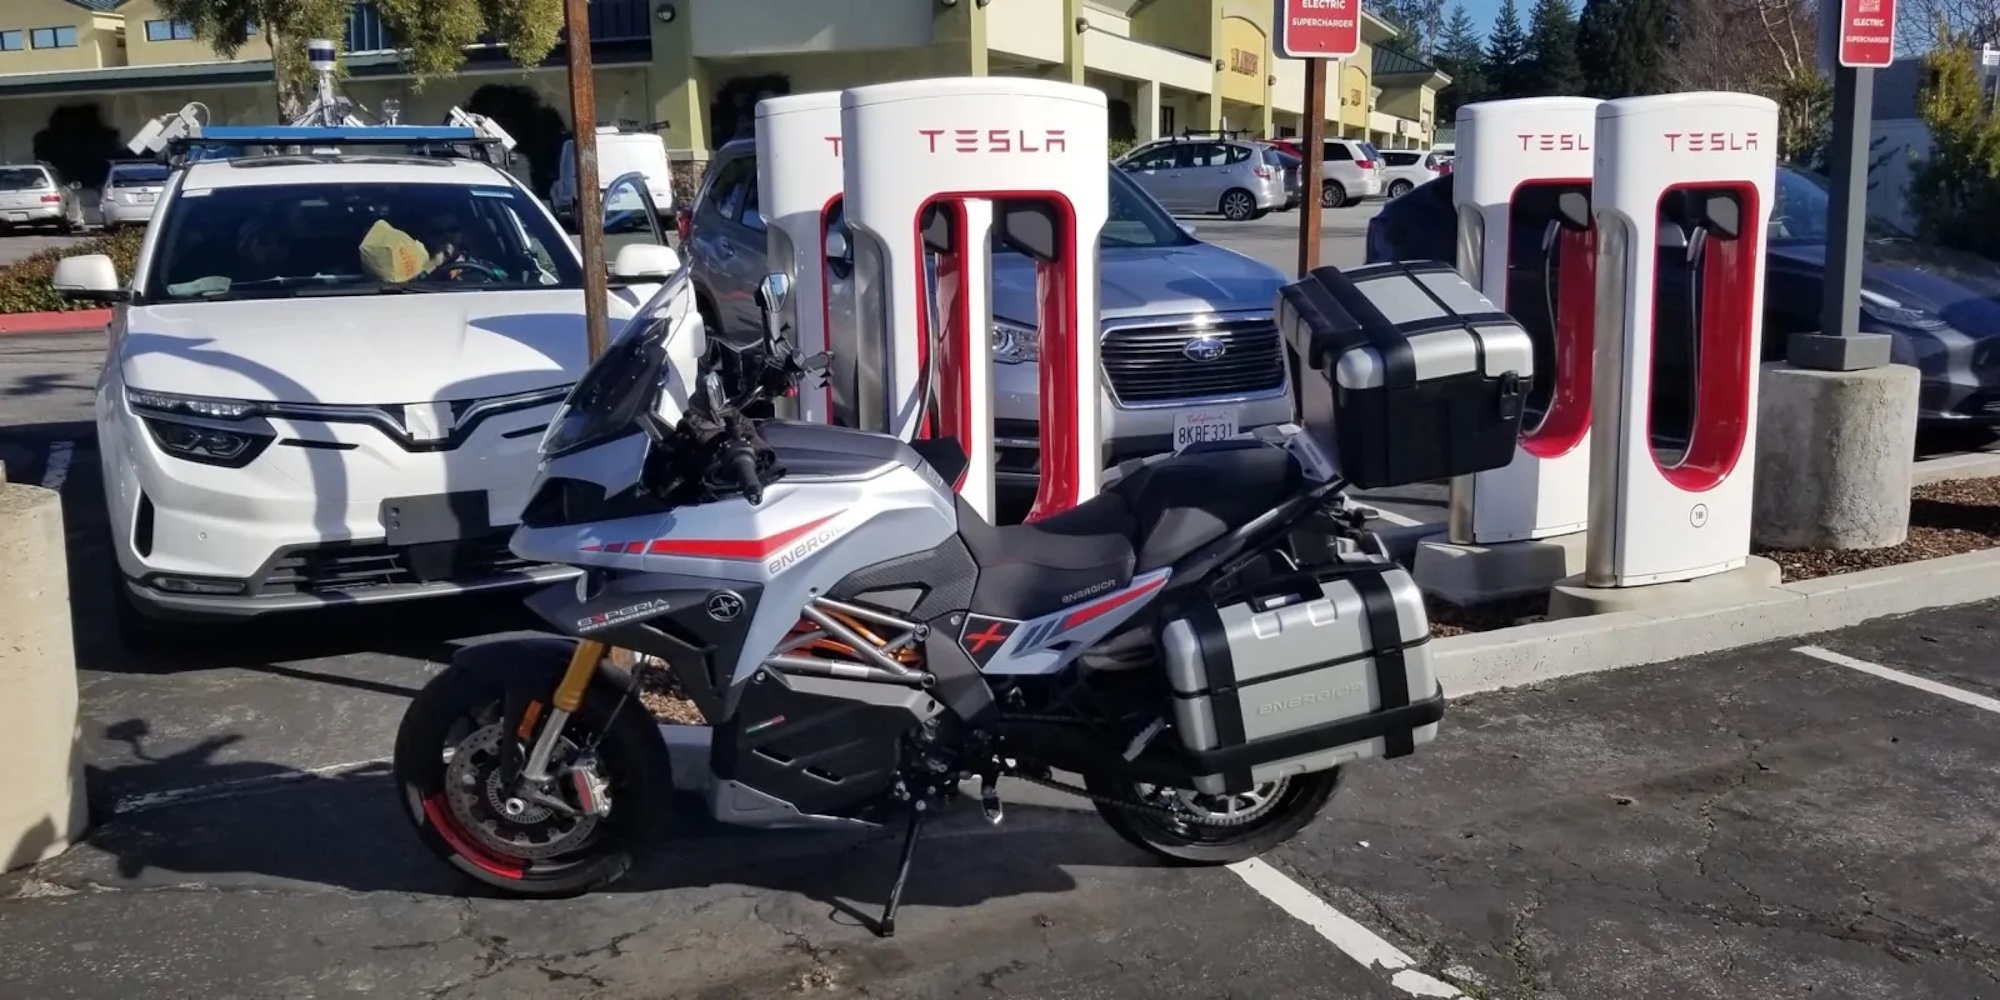 A Zero motorcycles juicing up at a Tesla Supercharger. Media sourced from Electrek.